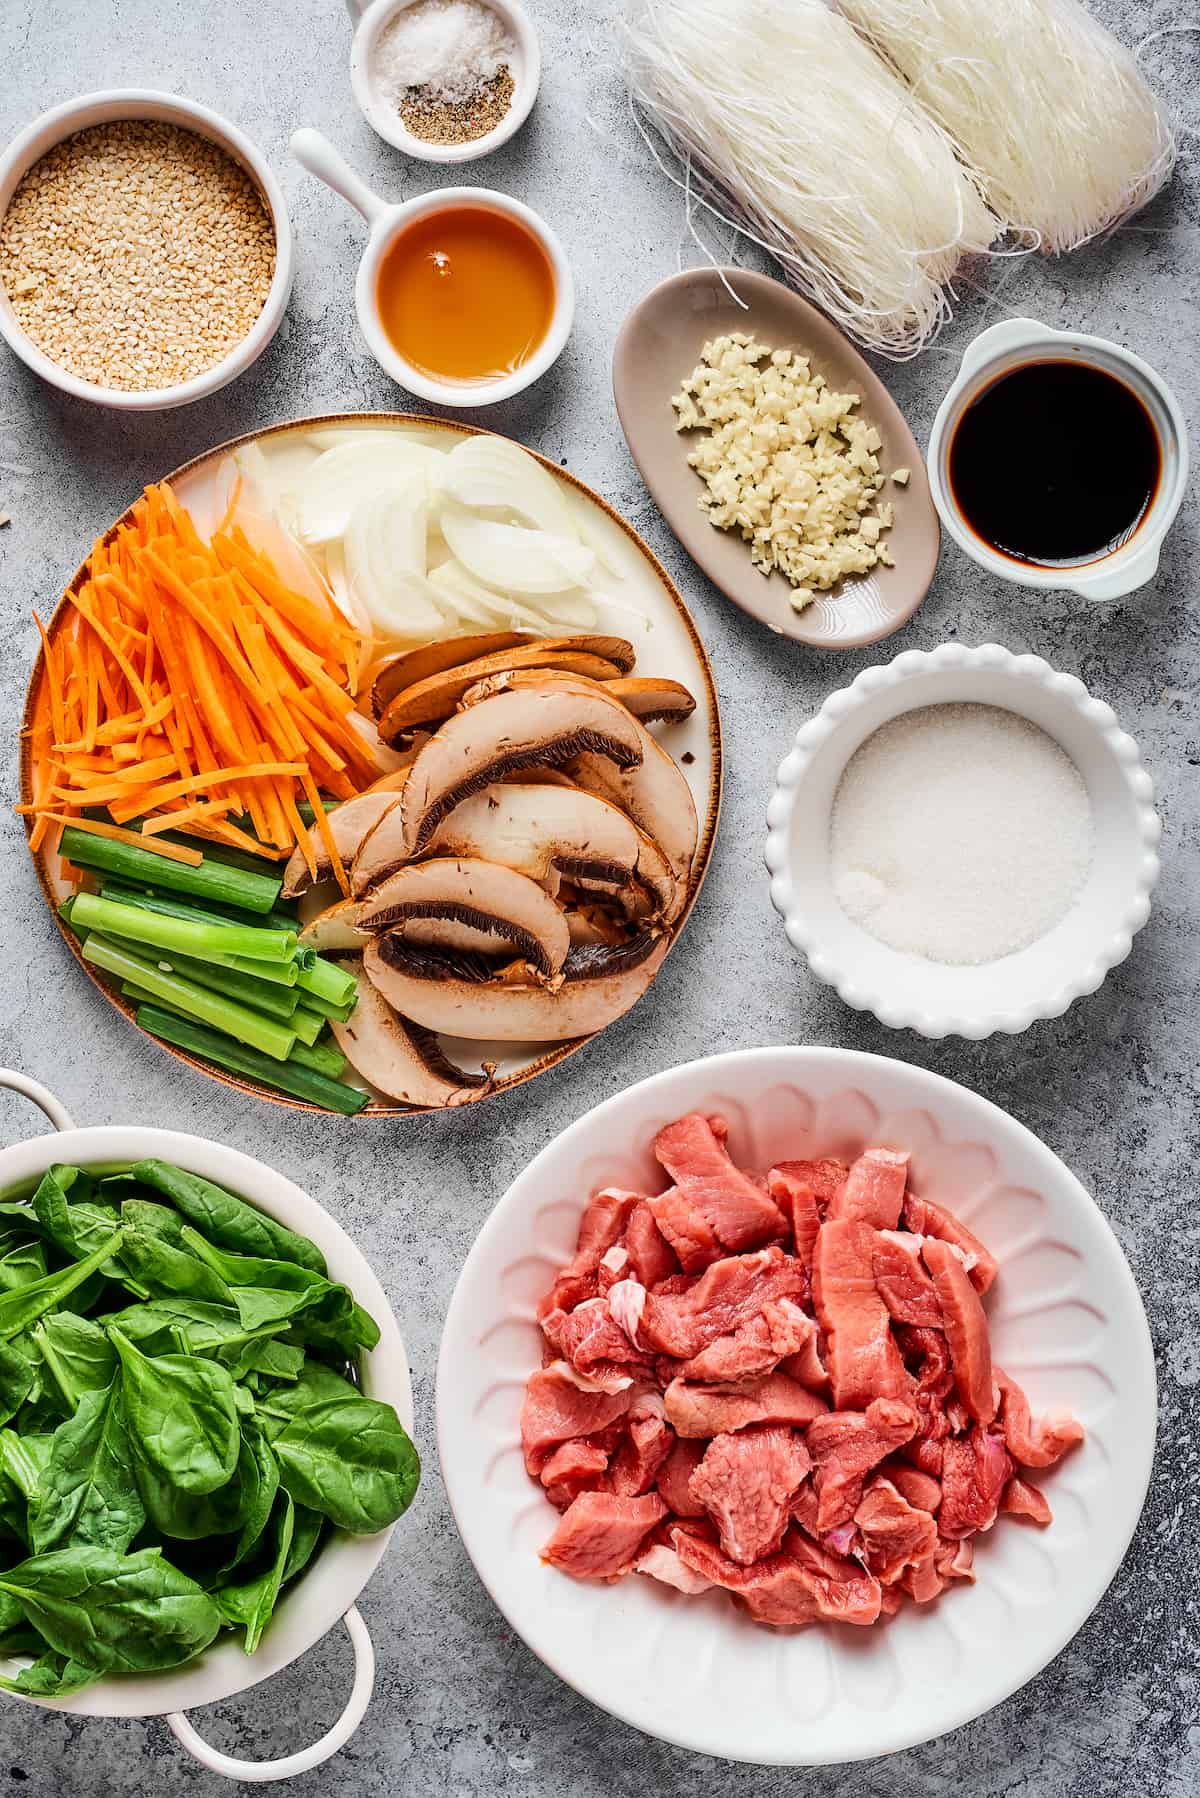 From top left: Toasted sesame seeds, salt and pepper, dried glass noodles, sesame oil, garlic, soy sauce, carrots, onions, green onion, mushrooms, sugar, spinach, sliced steak.